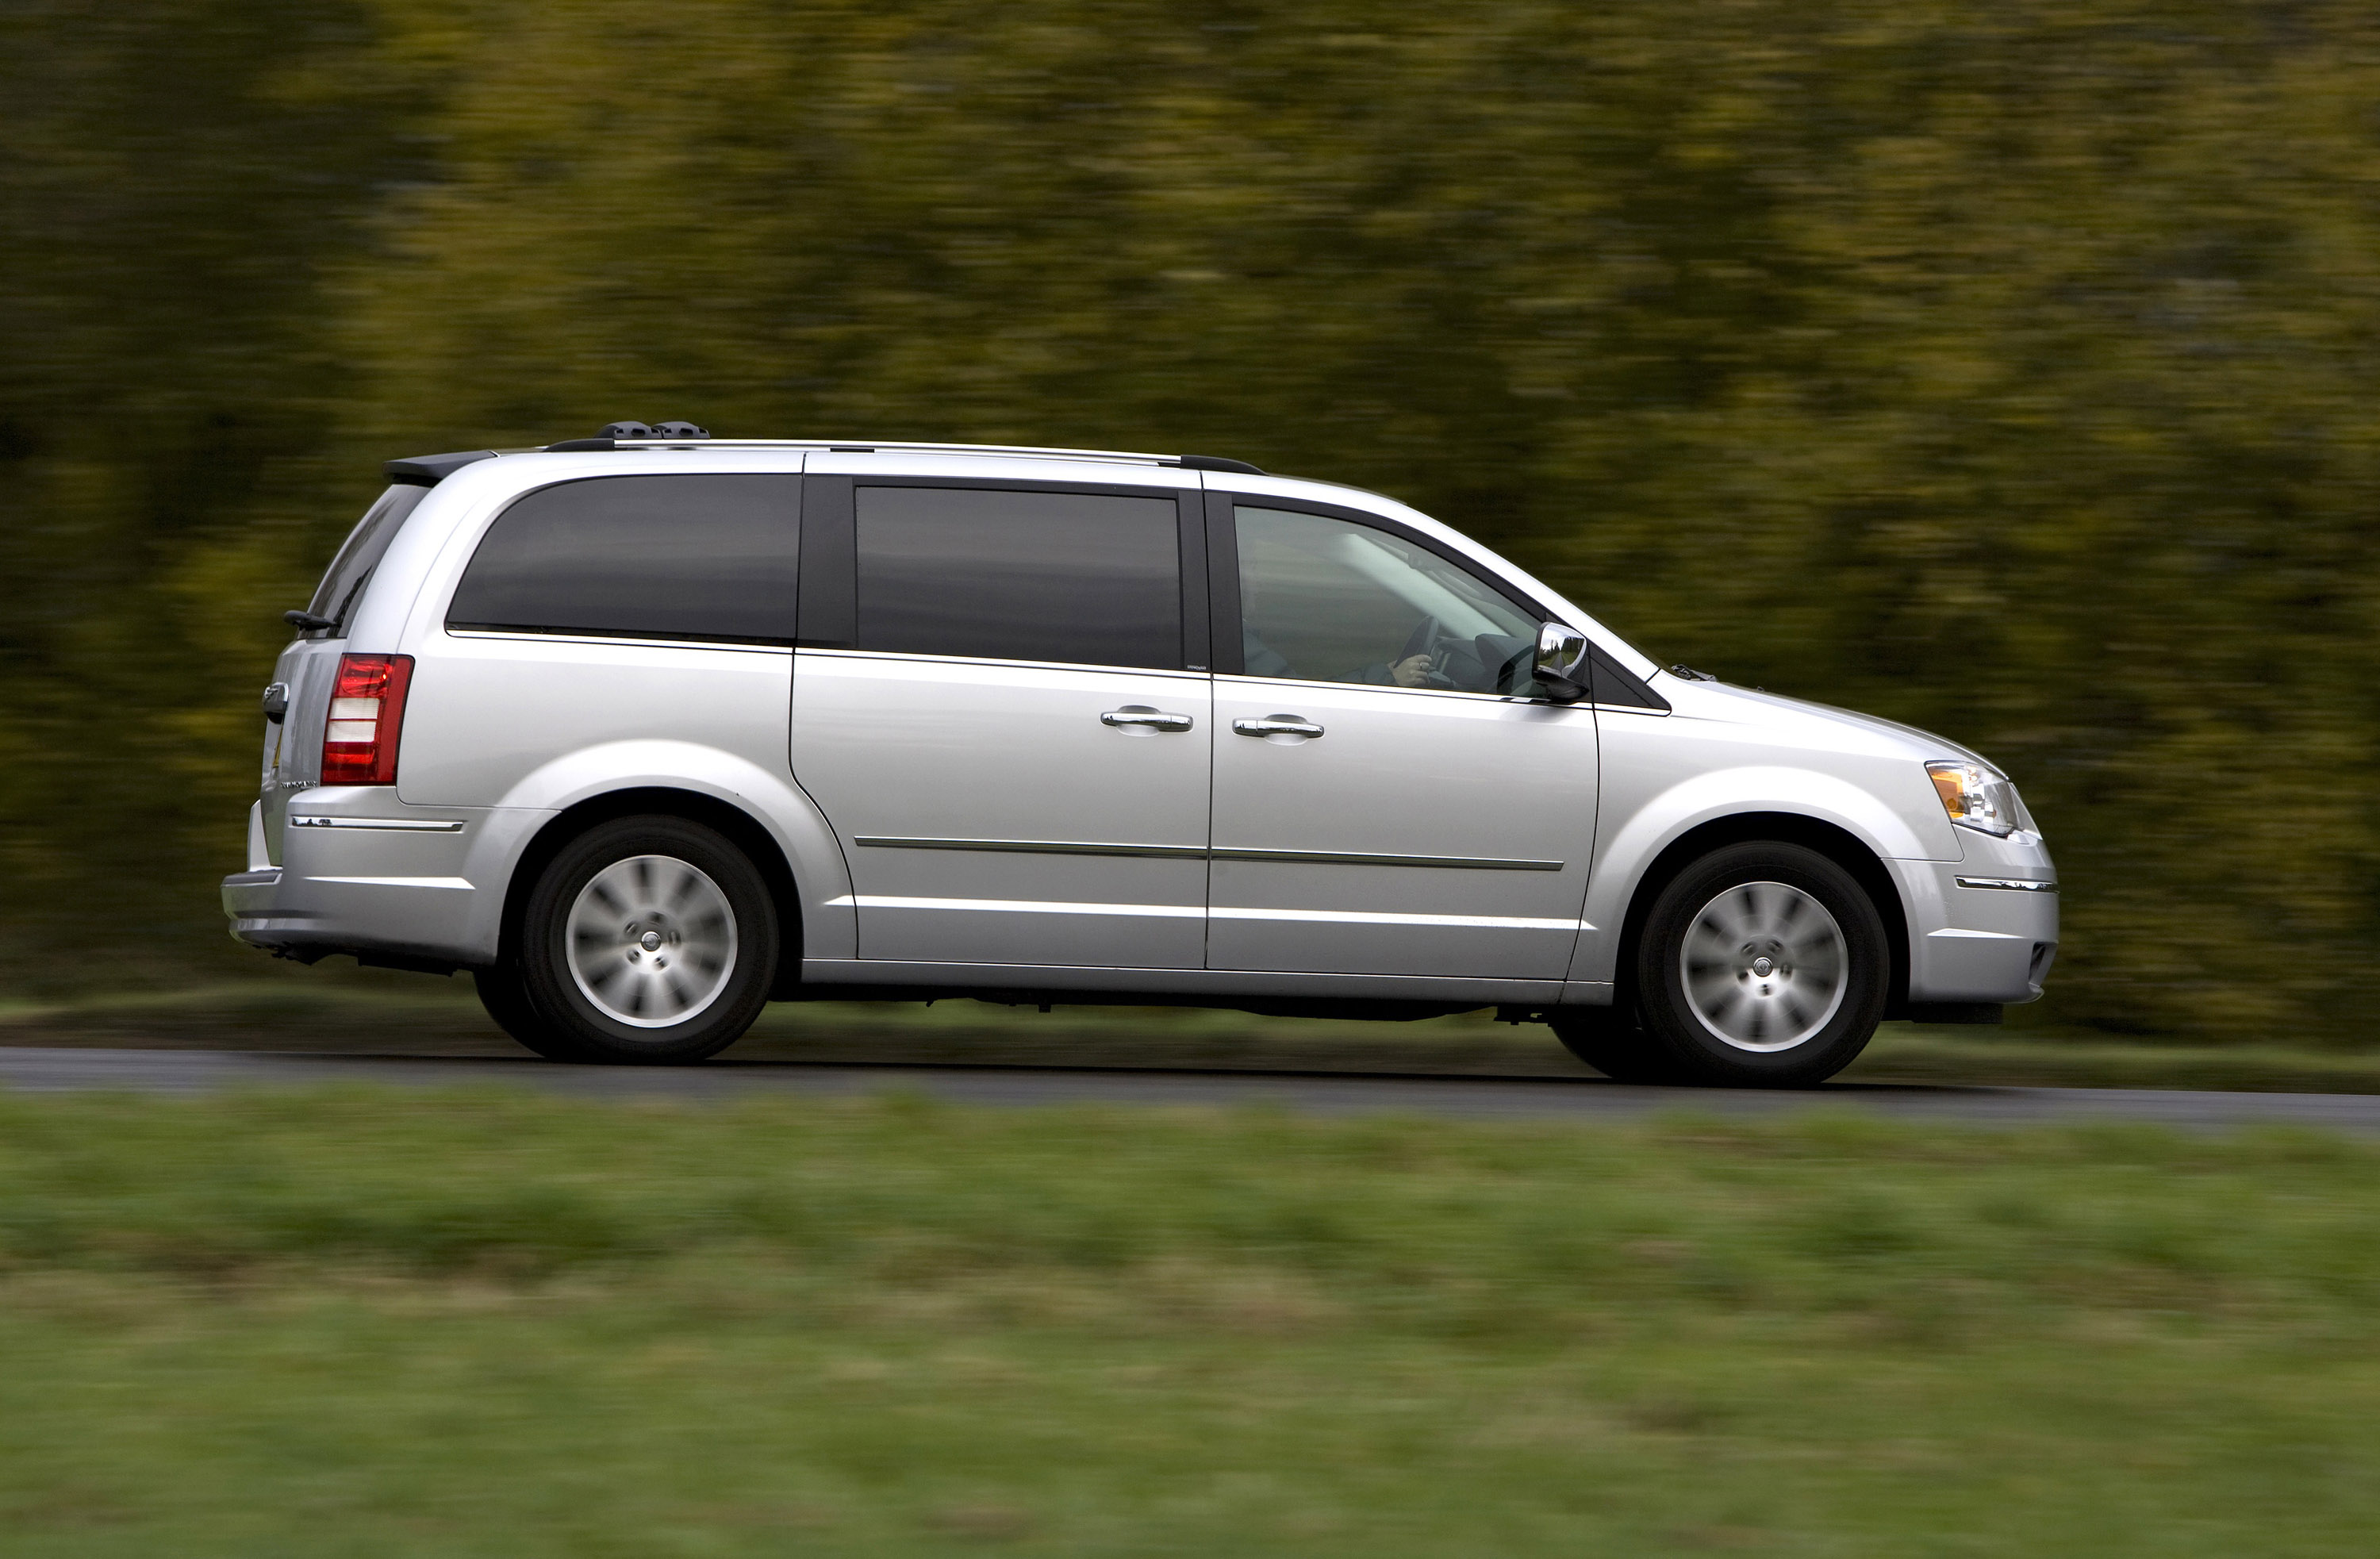 Chrysler voyager video review #2